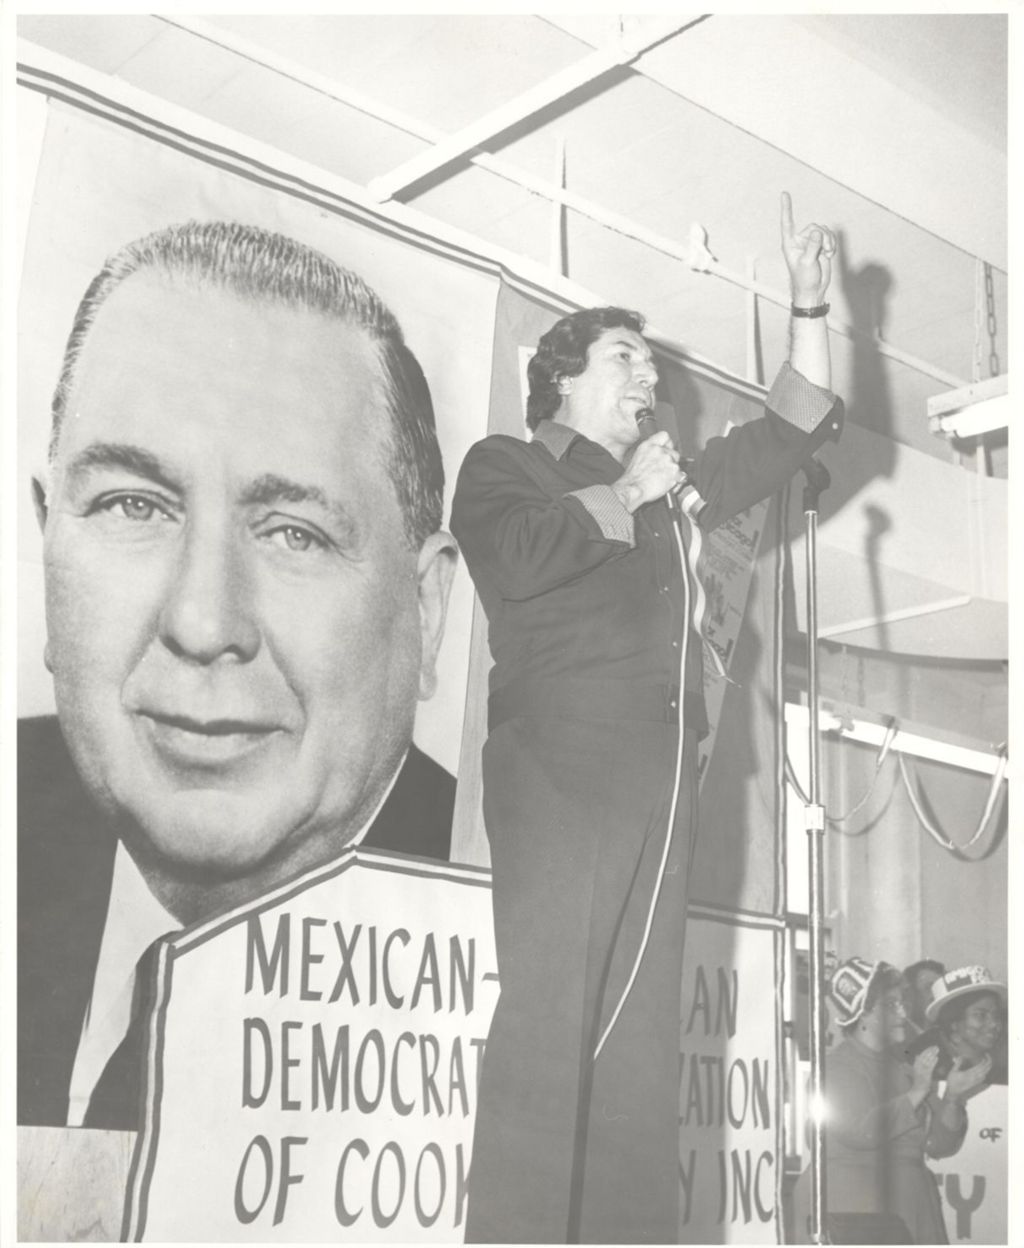 Miniature of Speaker at Mexican-American Democratic Organization of Cook County event